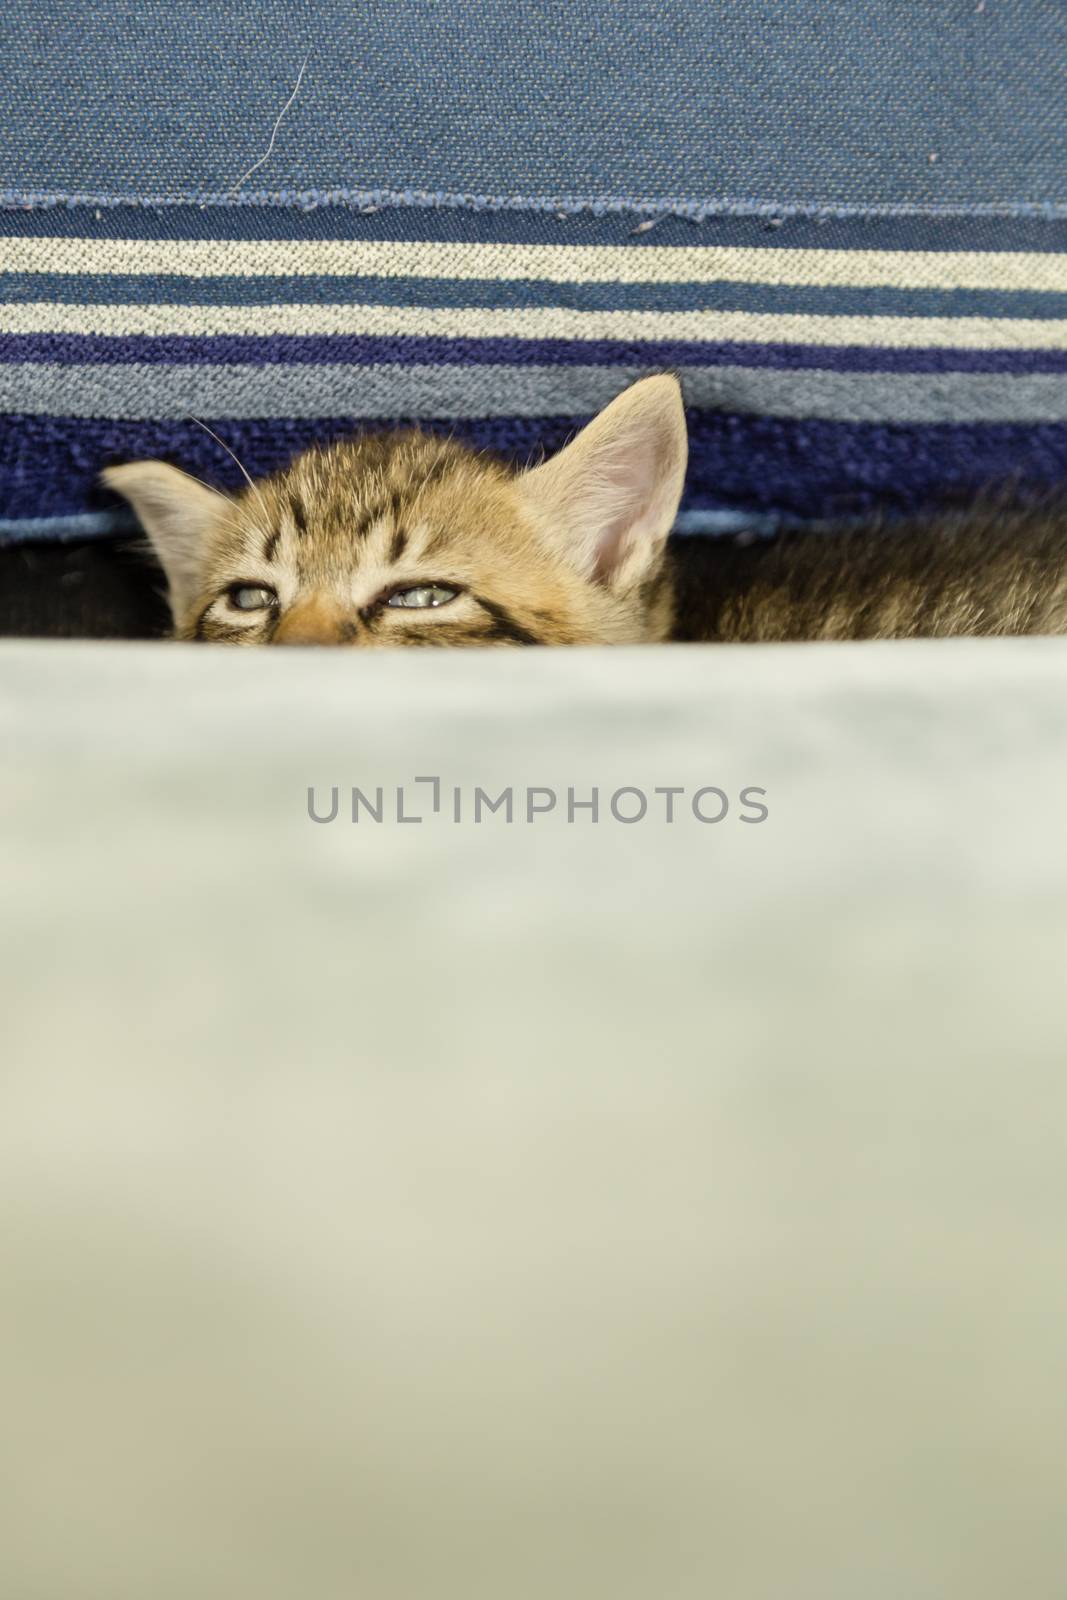 Kitten with tiger stripes peeking from btween cushions on blue couch